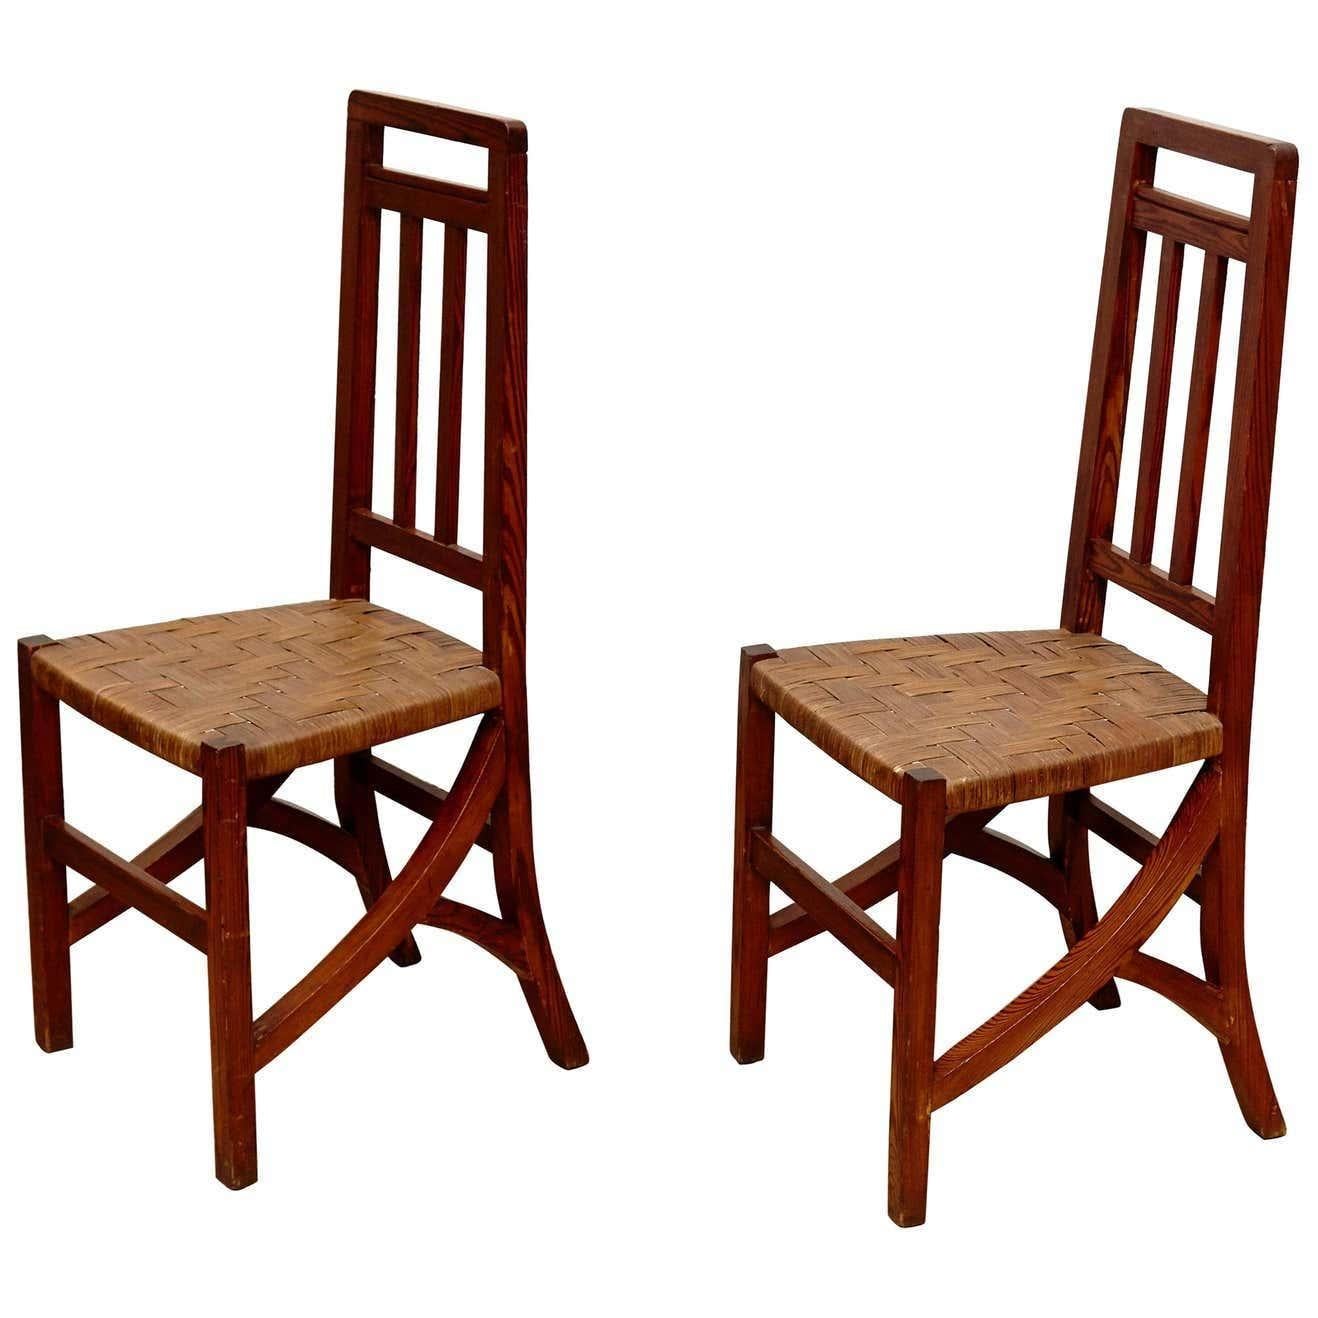 Set of Two Arts & Crafts Chairs in Wood and Rattan, circa 1910 For Sale 10